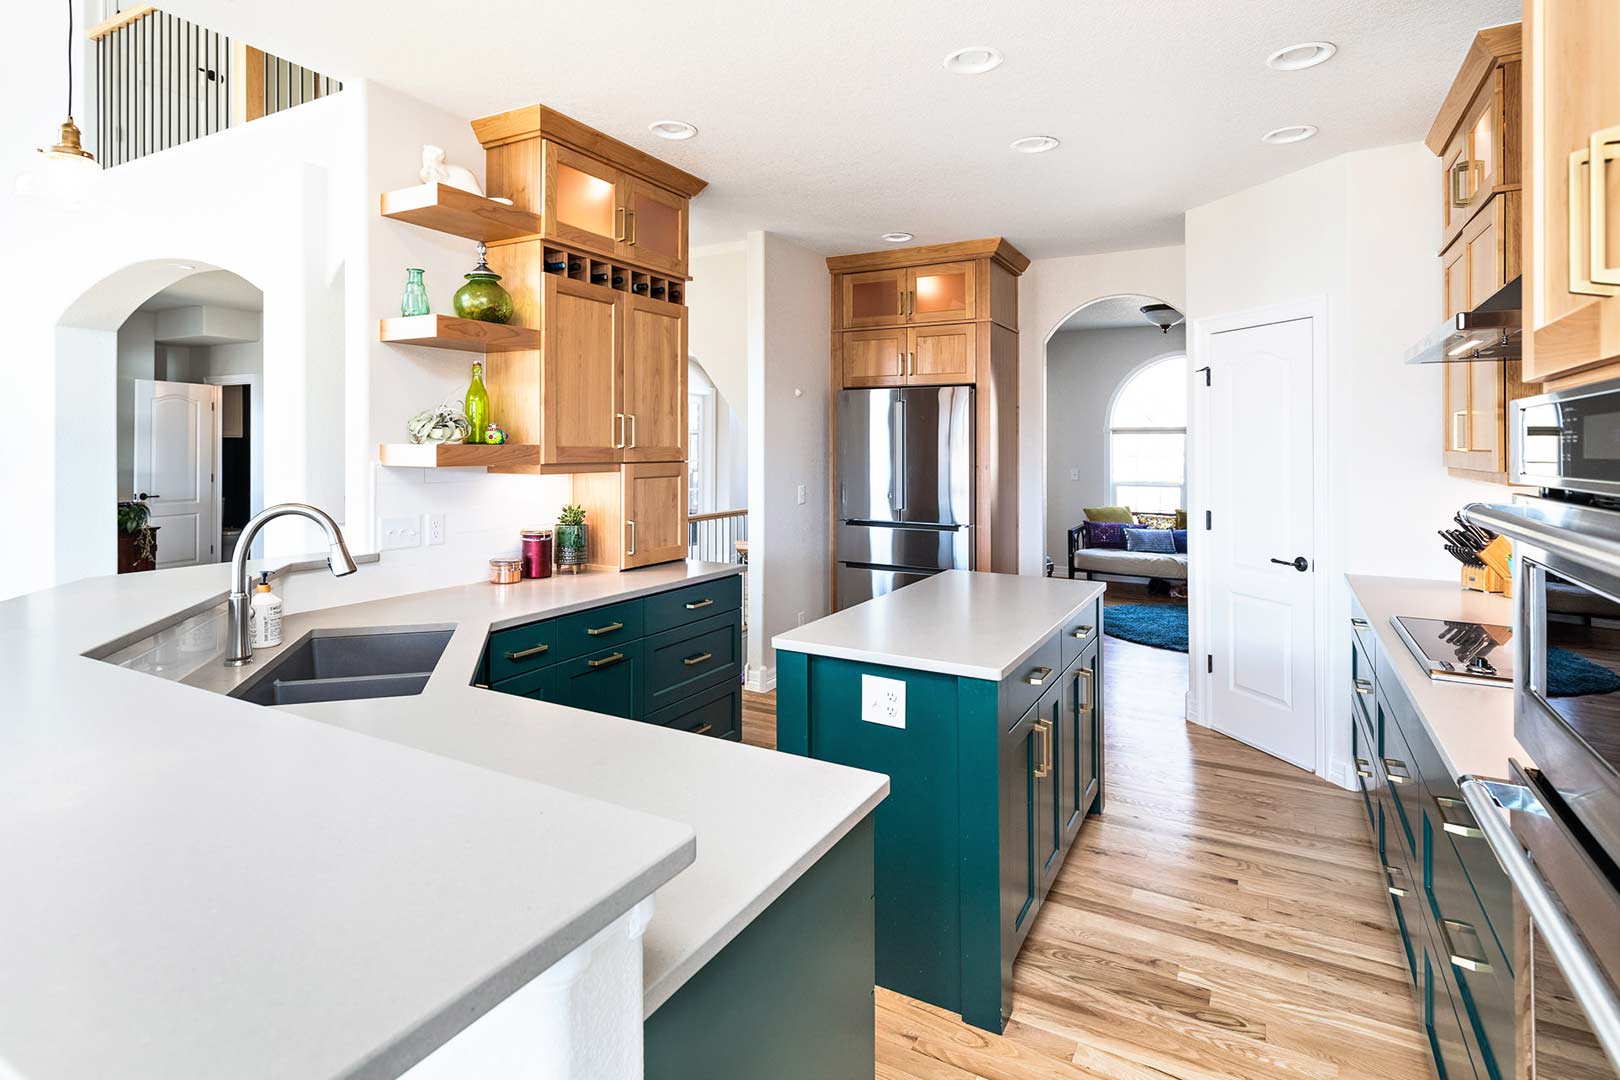 View of the modern transitional kitchen renovation that shows the massive amount of counter space and details of the kitchen cabinets designed by Freestone Design-Build.